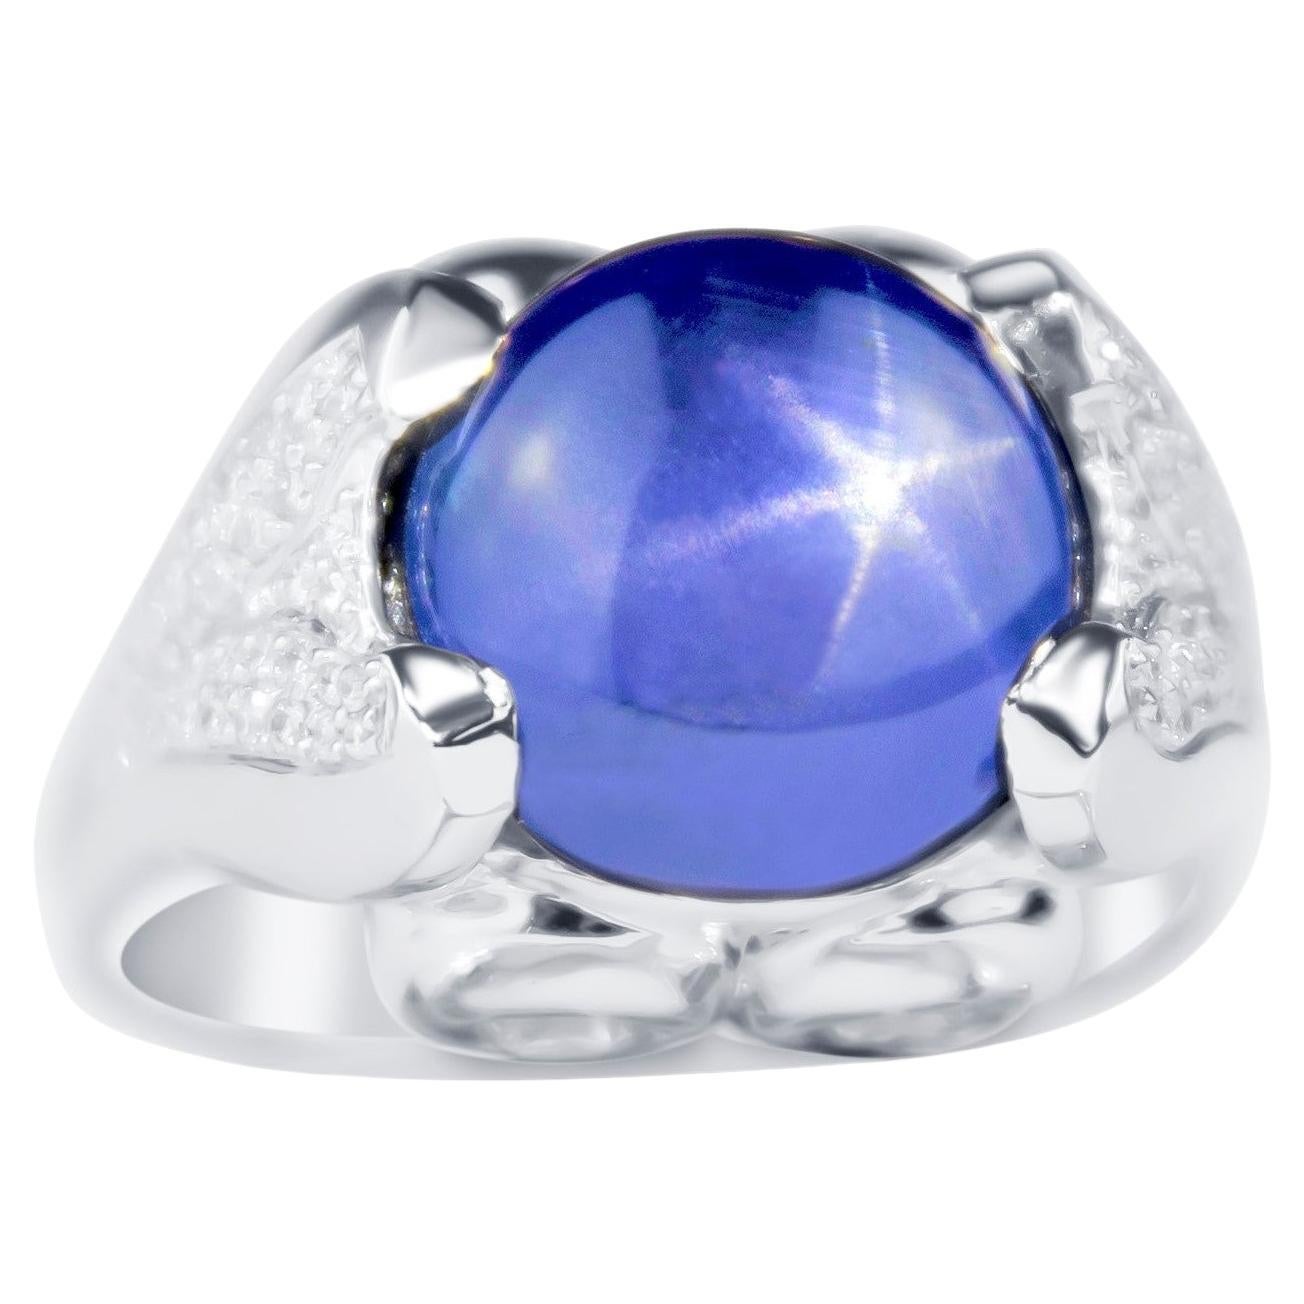 King Solomon Ring, a unique and stunning piece of jewelry that embodies the legend of King Solomon and his legendary connection to the divine. This ring features a rare and exquisite 16.16 ct unheated star sapphire from Ceylon, with an ocean blue